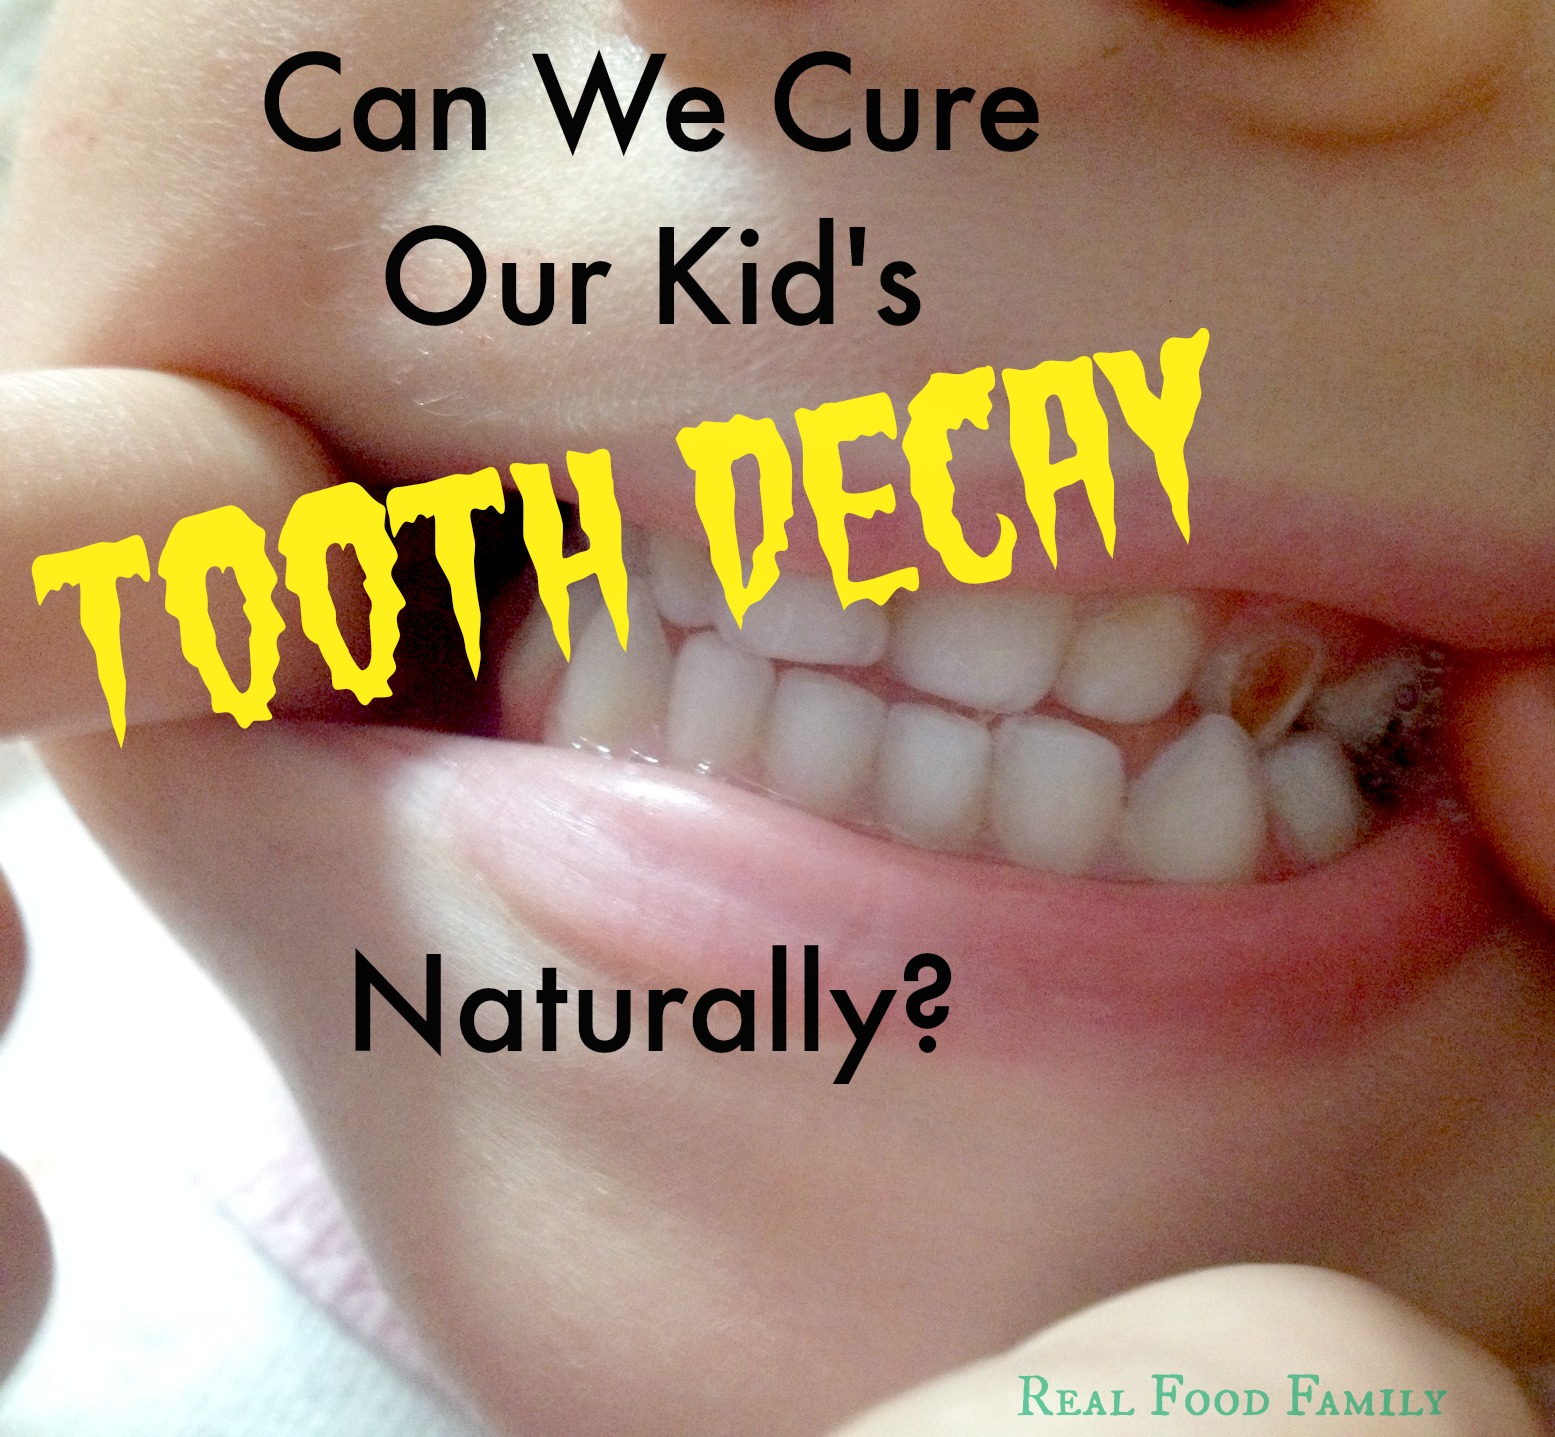 Can We Cure Our Kid’s Tooth Decay Naturally?